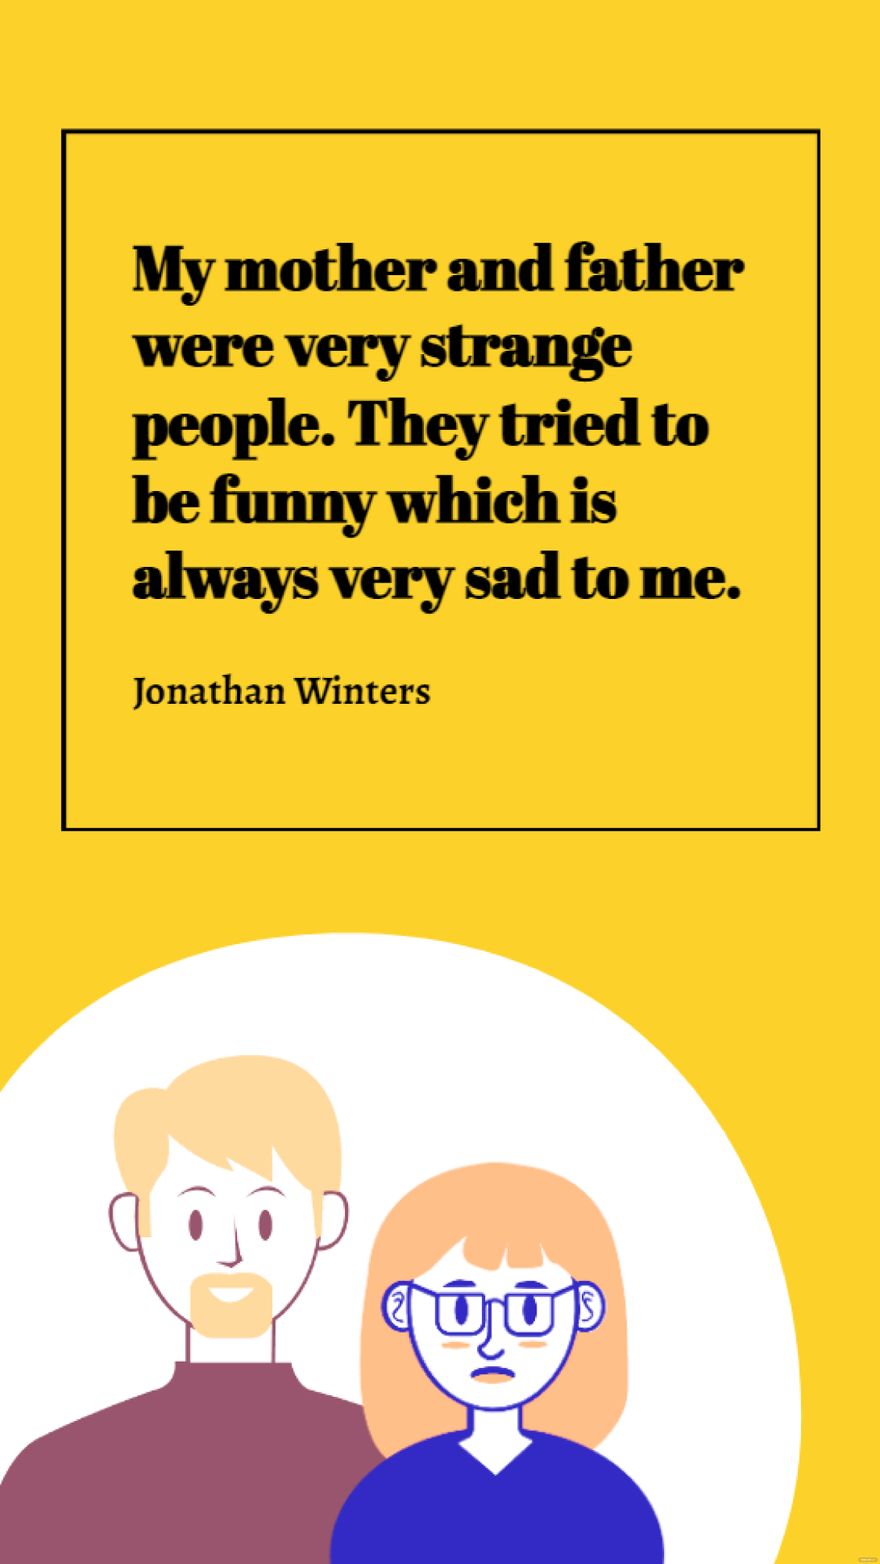 Jonathan Winters Sad Quote - My mother and father were very strange people.  They tried to be funny which is always very sad to me. 